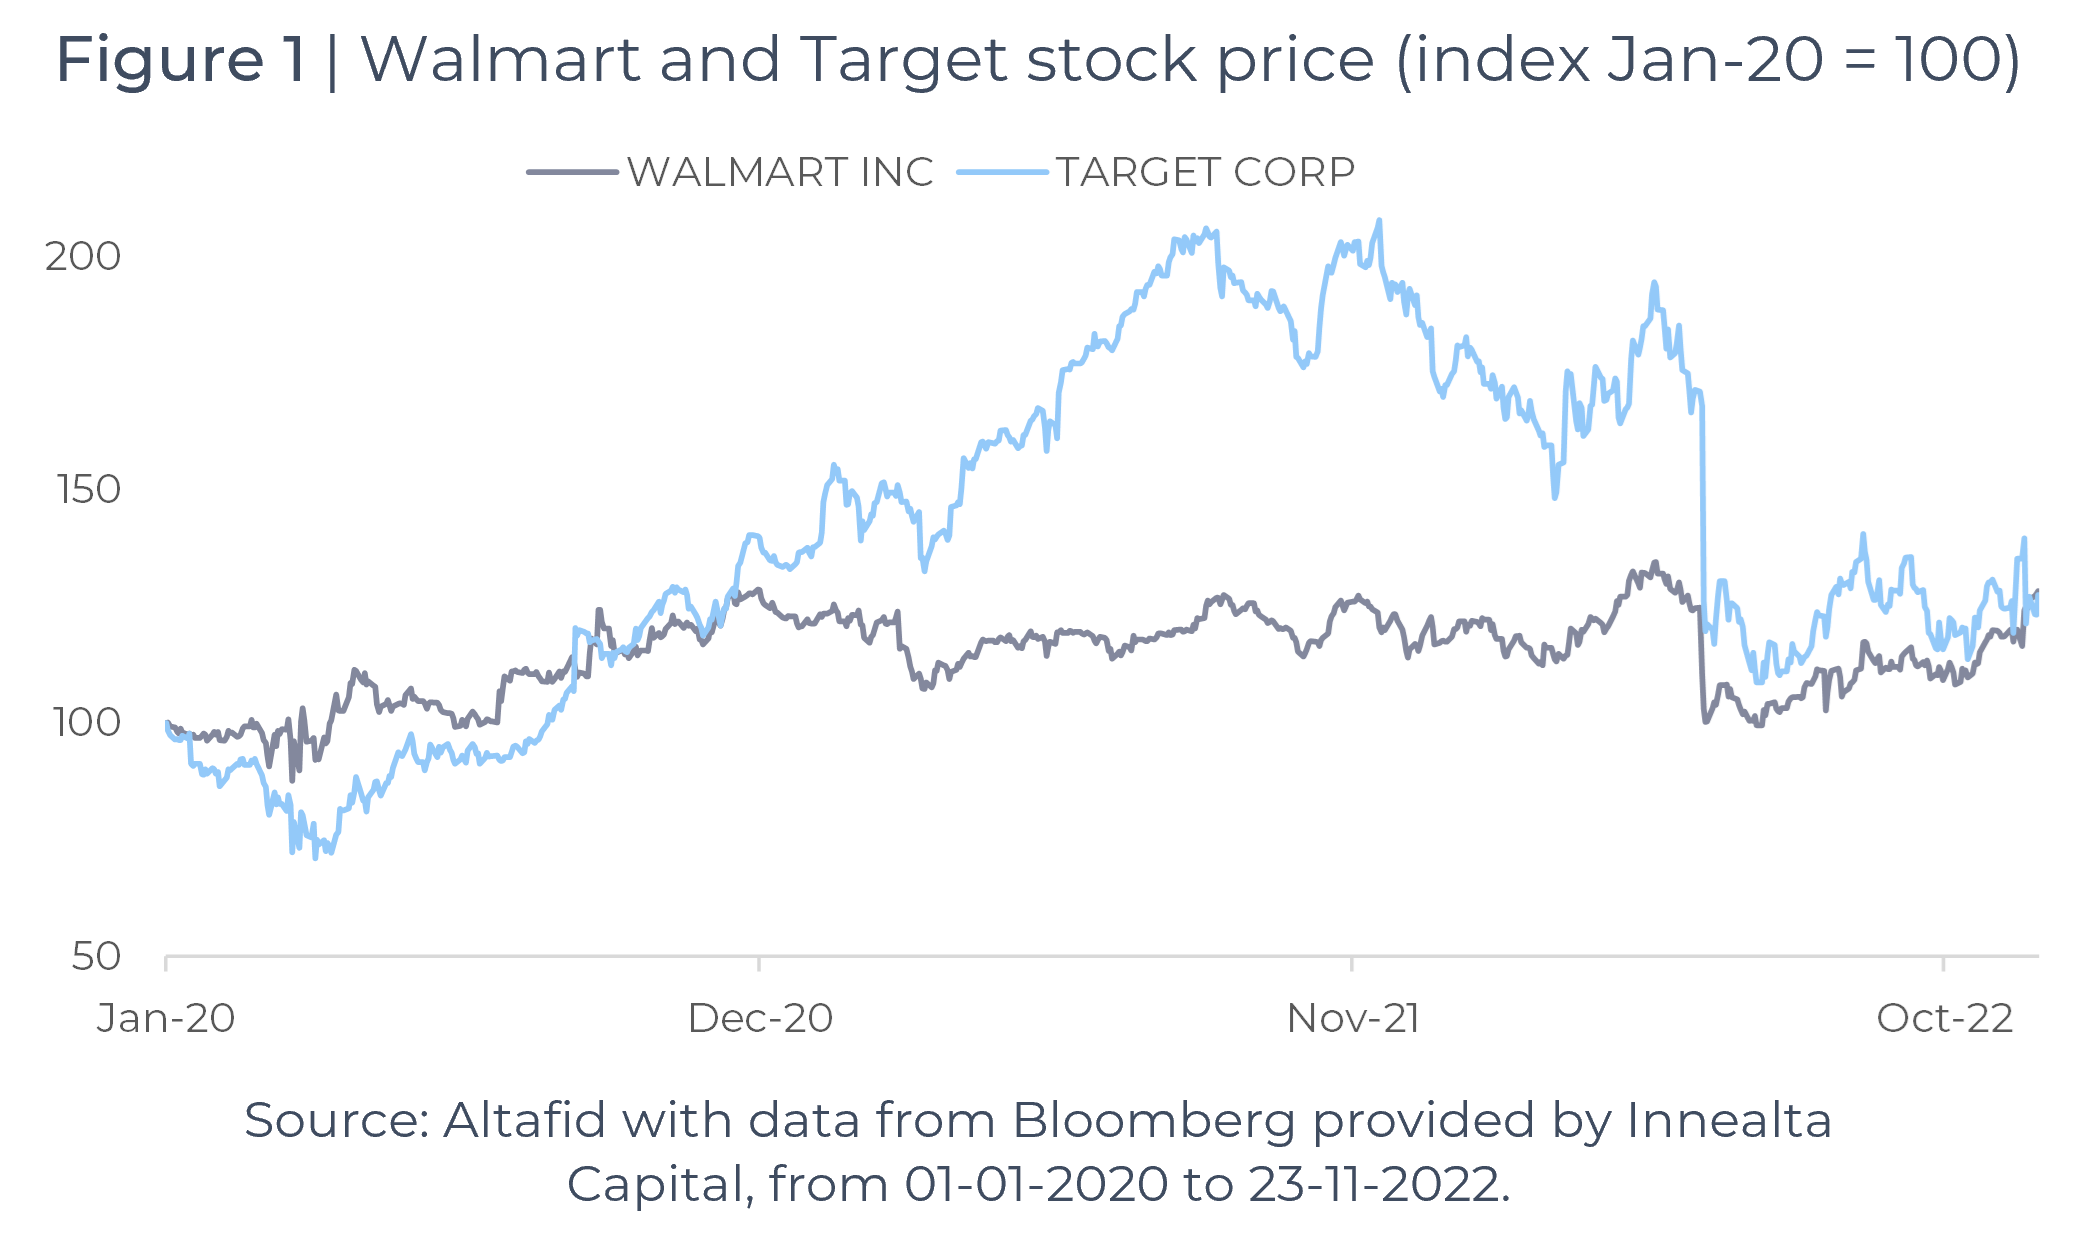 Walmart and Target stock price, from january 2020 to november 2022